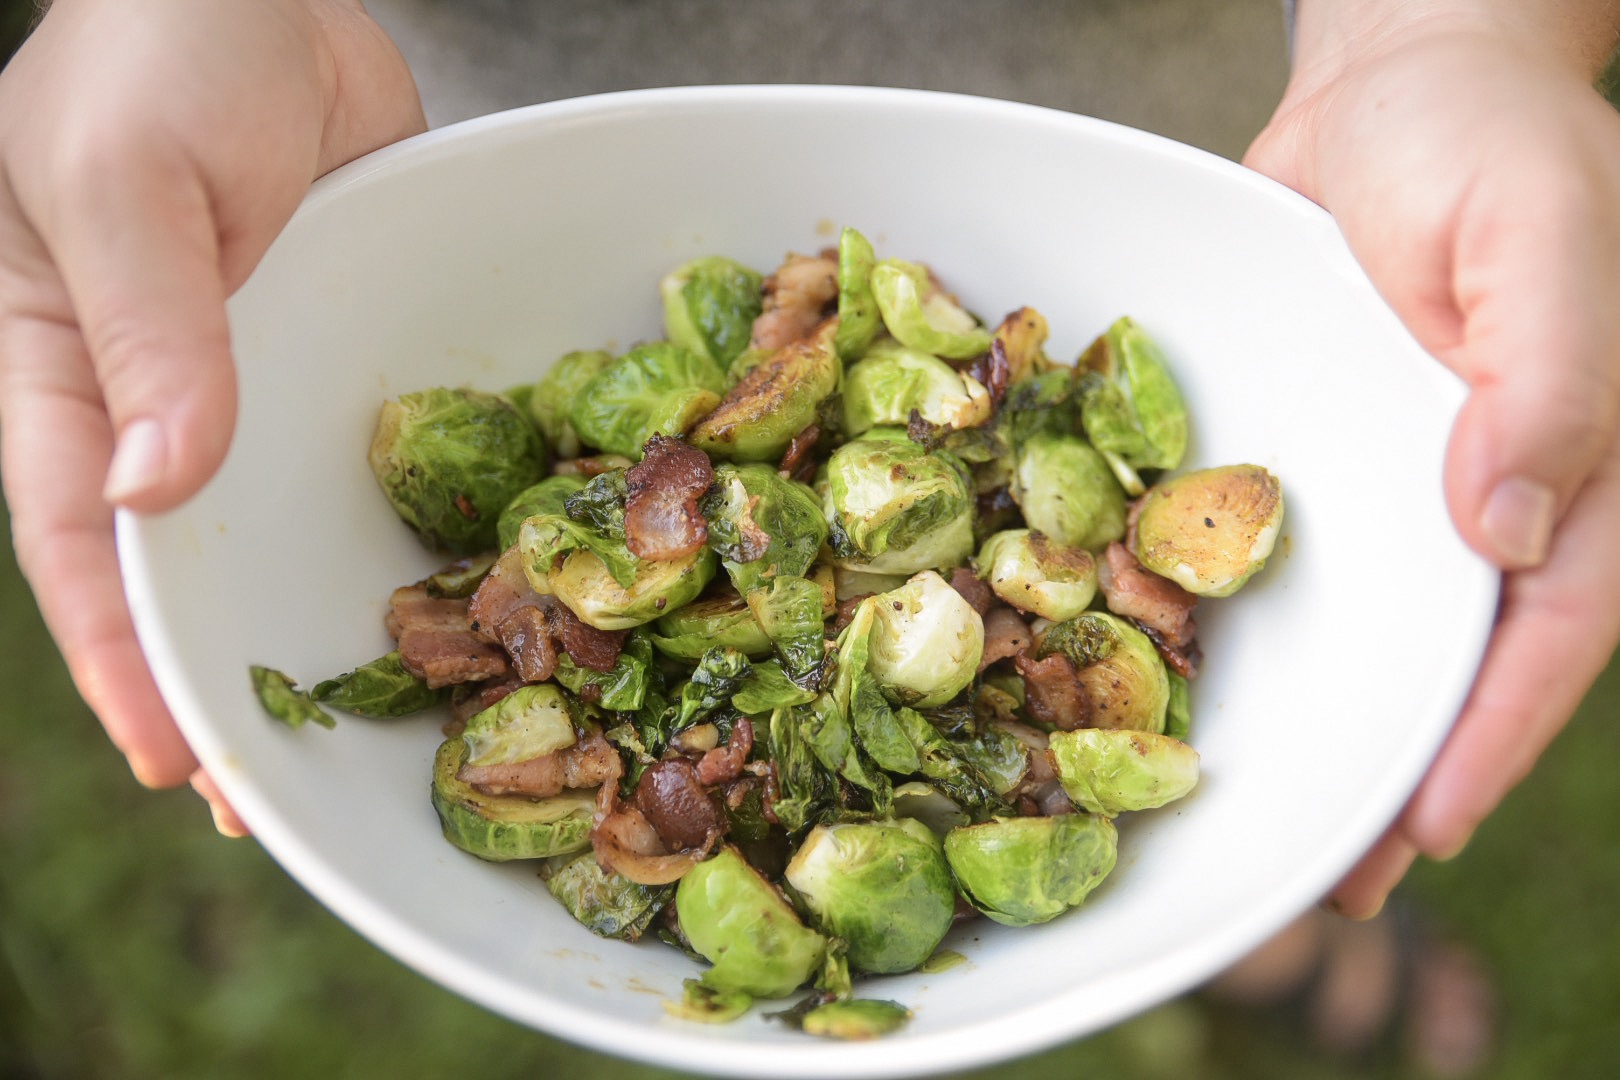 Featured image for “Candied Brussel Sprouts”